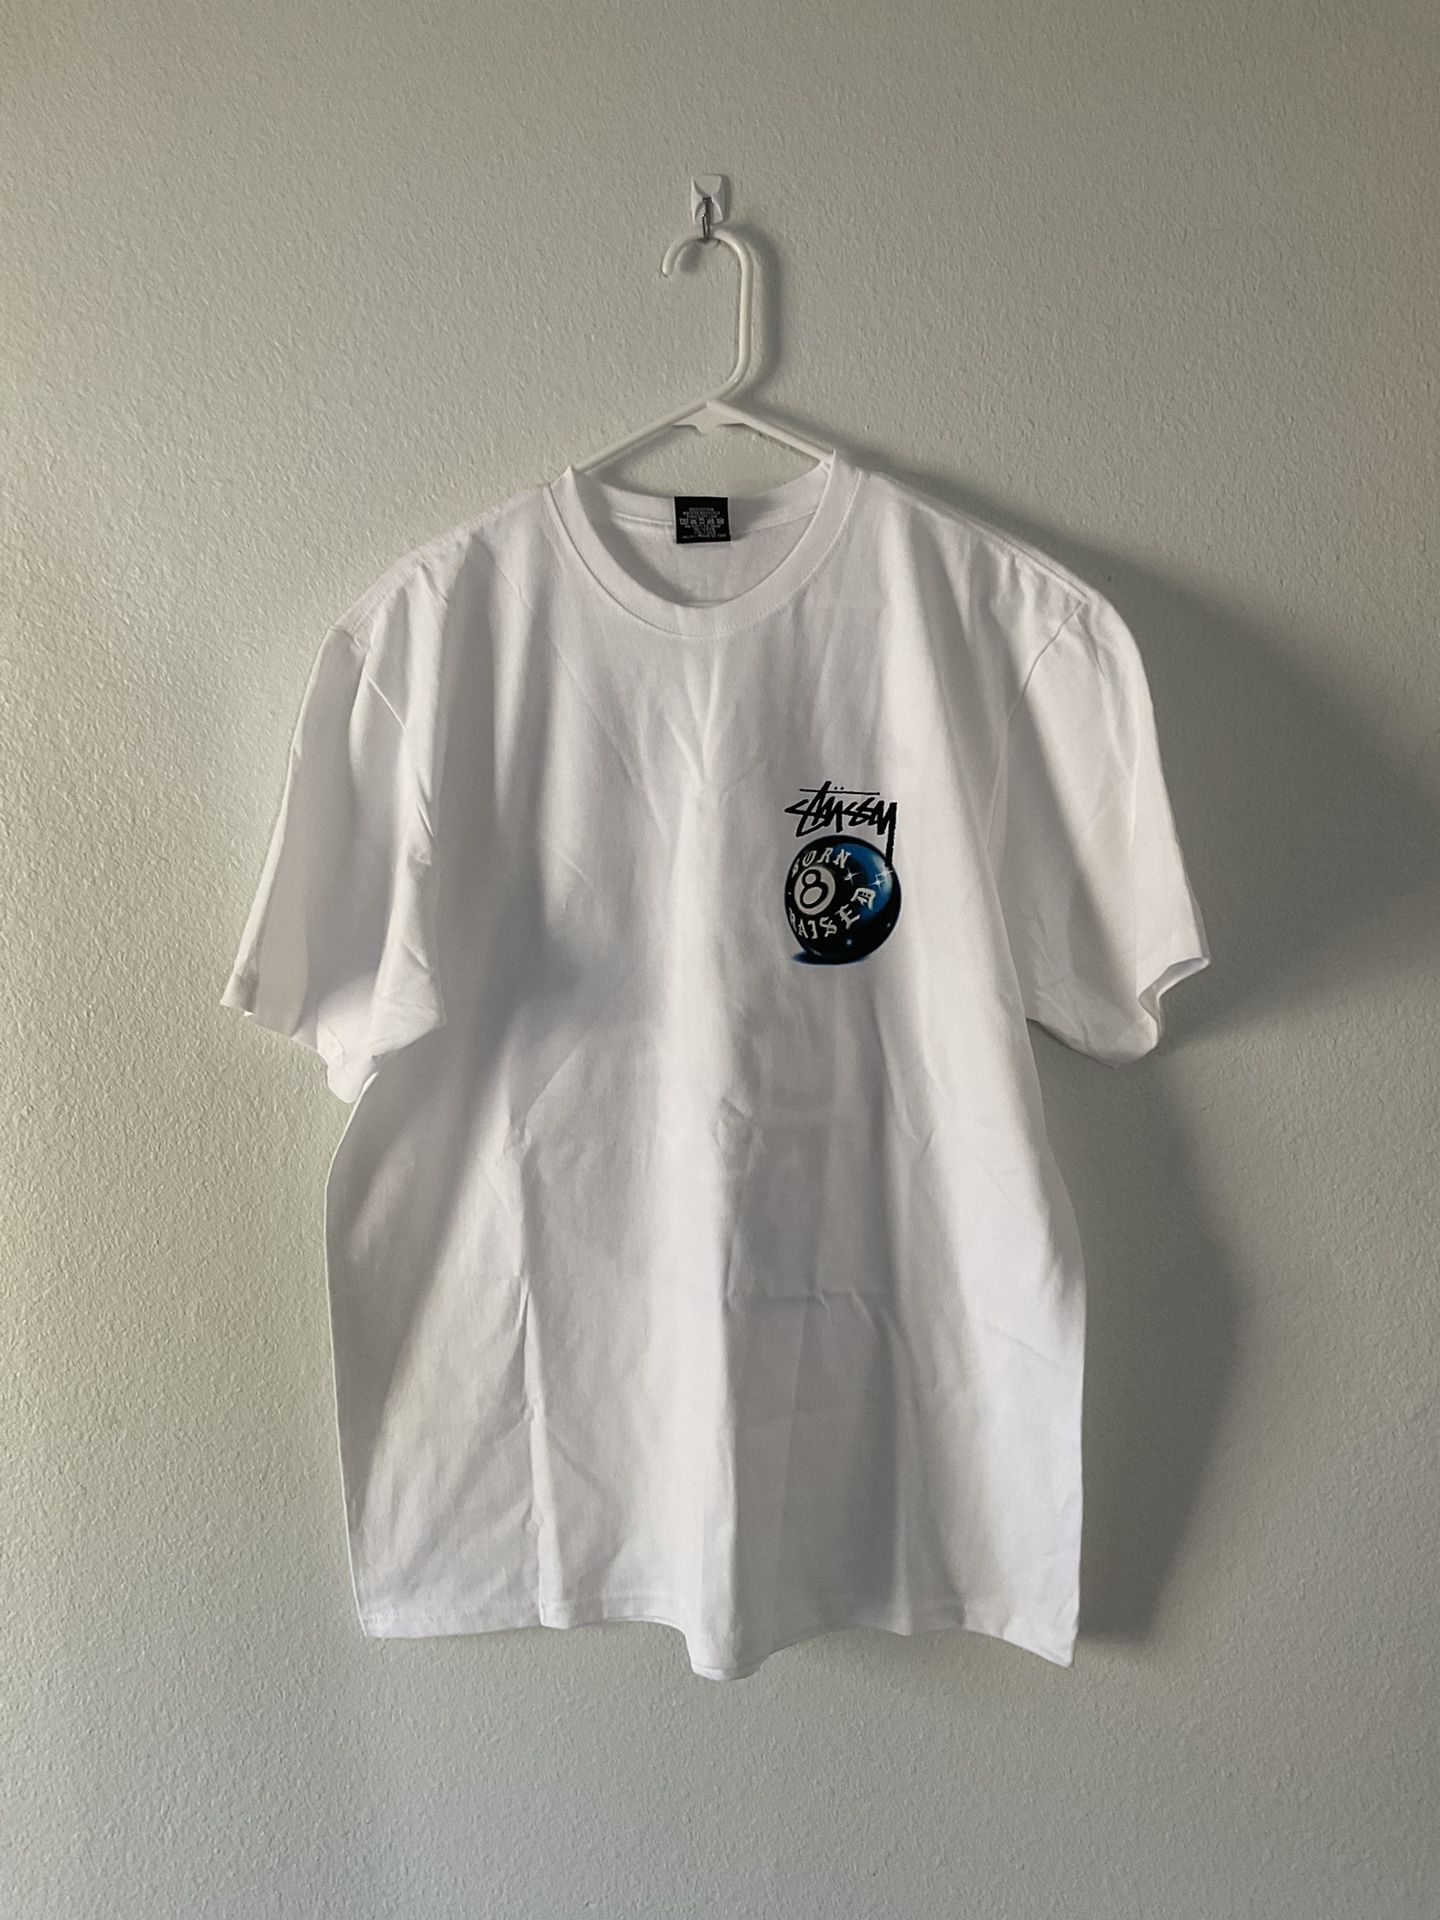 Stussy Born x Raised 8 Ball Tee Size Large for Sale in Escondido